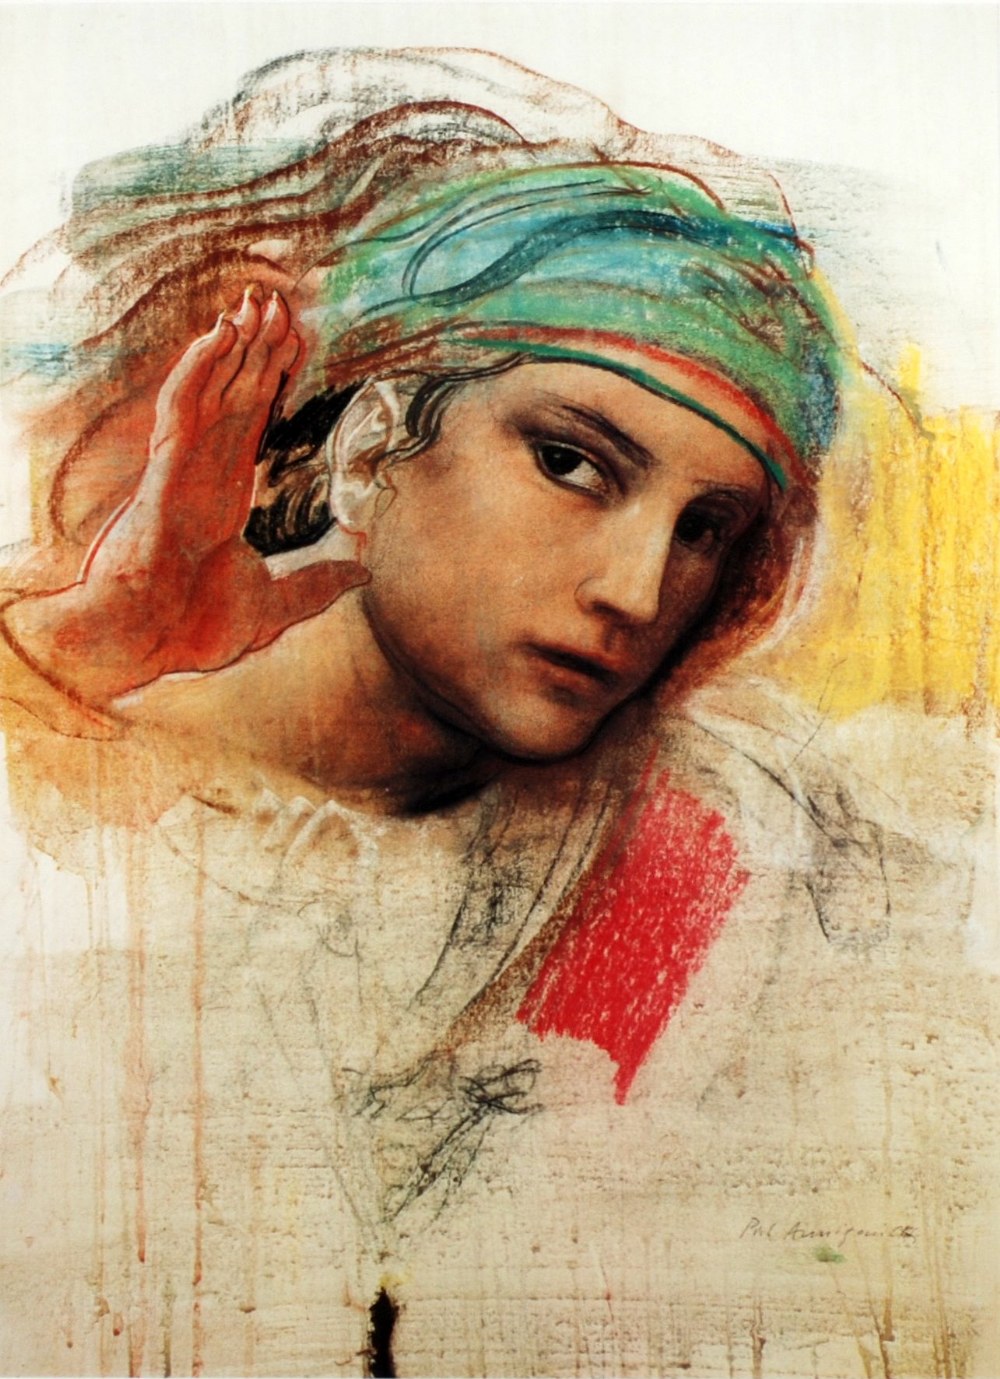 AFTER PIETRO ANNIGONI COLOUR PRINT REPRODUCTION Head of a woman wearing a turban 16" x 11 1/2" (40.